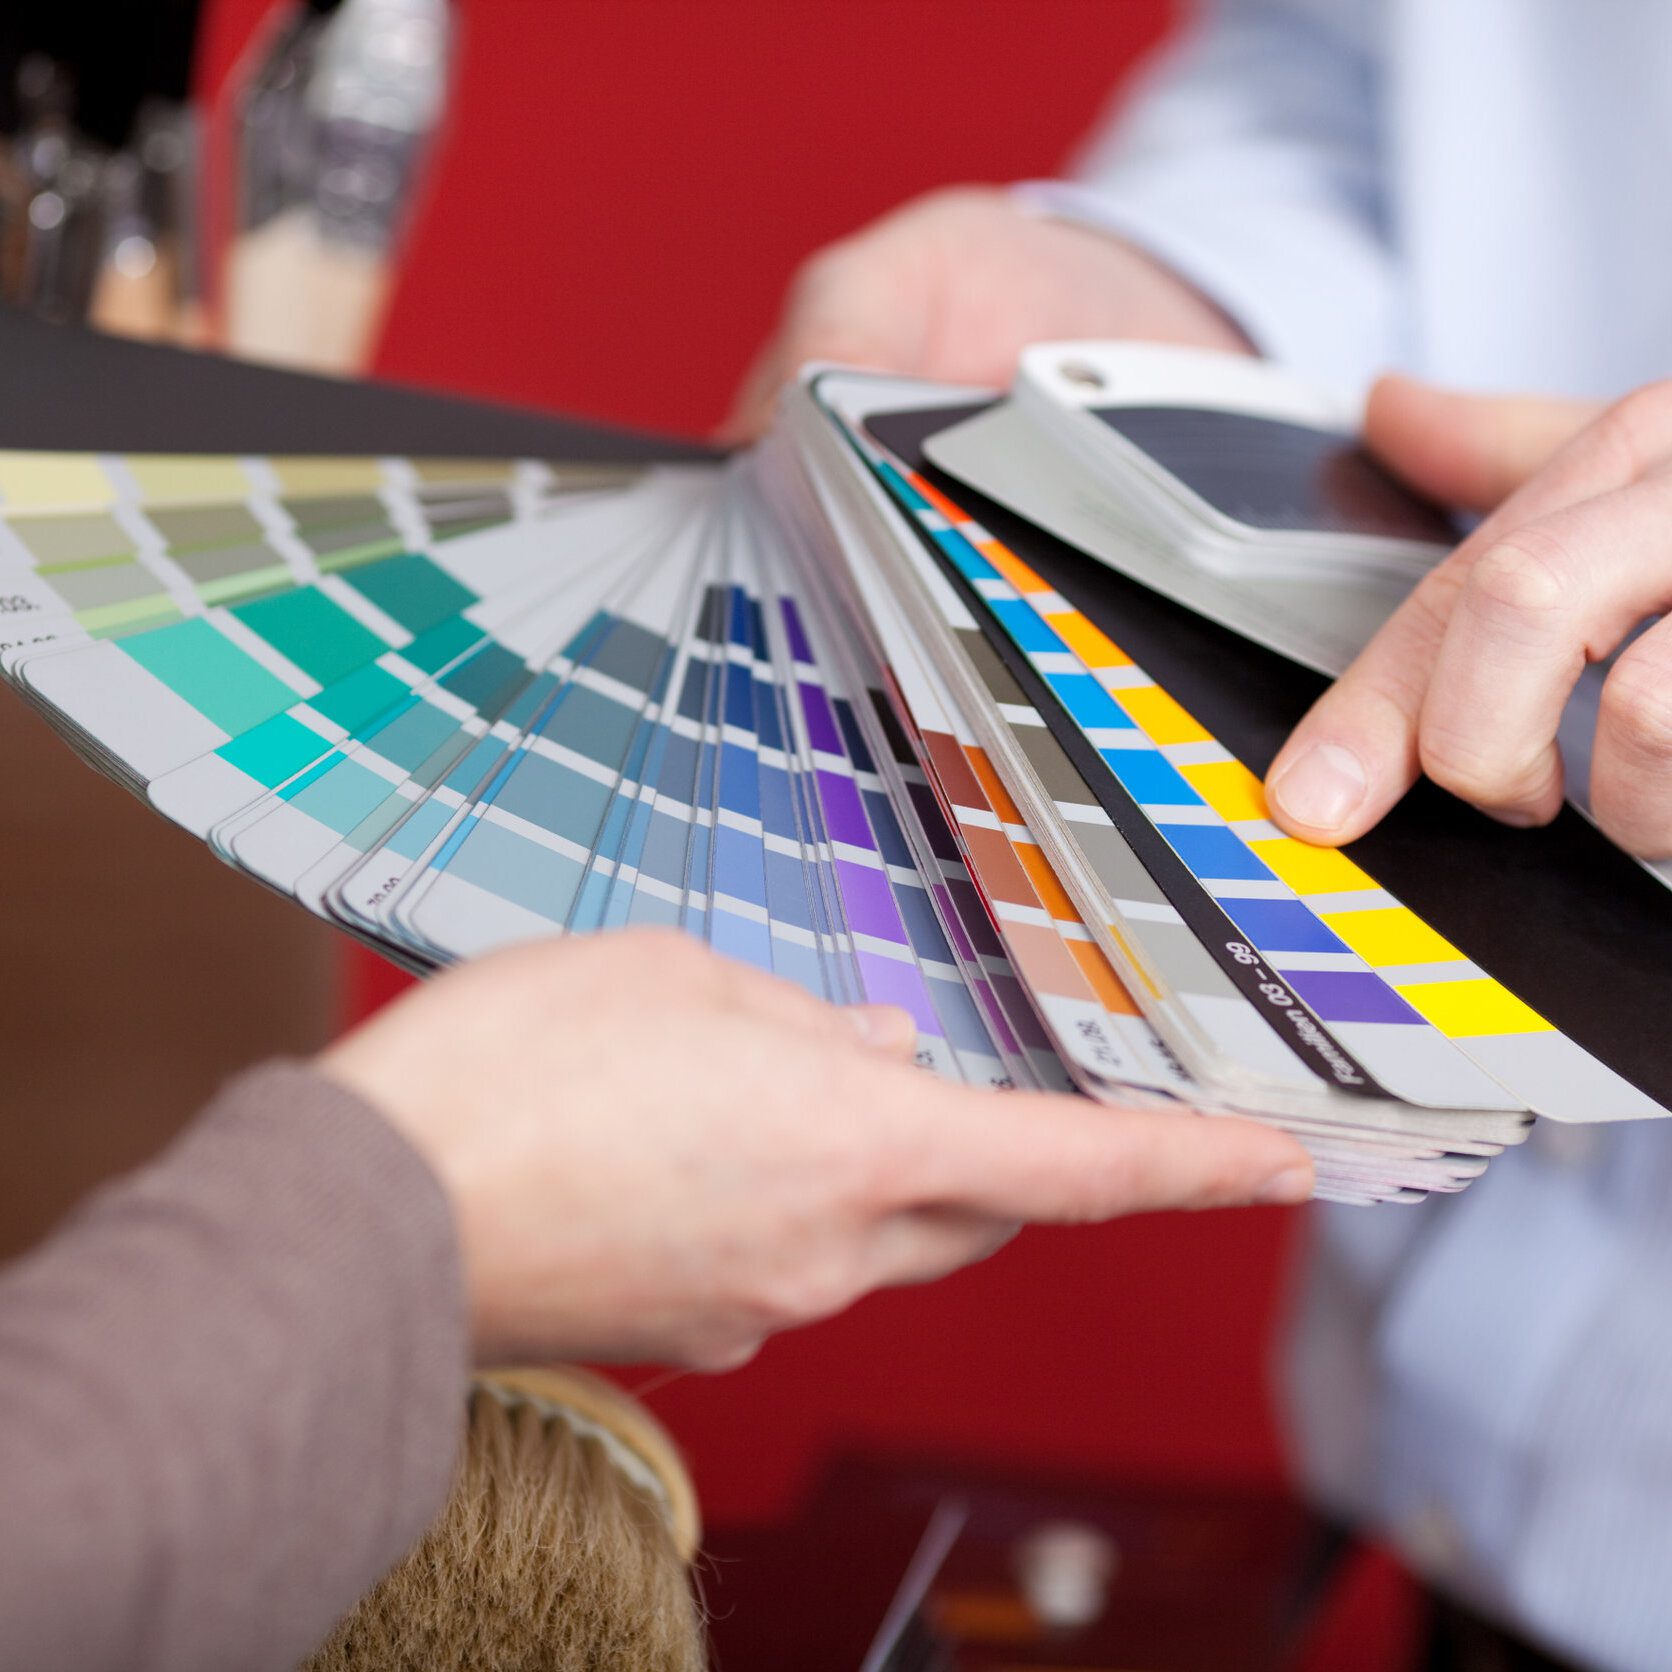 Interior decorator in a meeting with a client discussing various paint colours from a colourful set of swatches he is holding in his hand